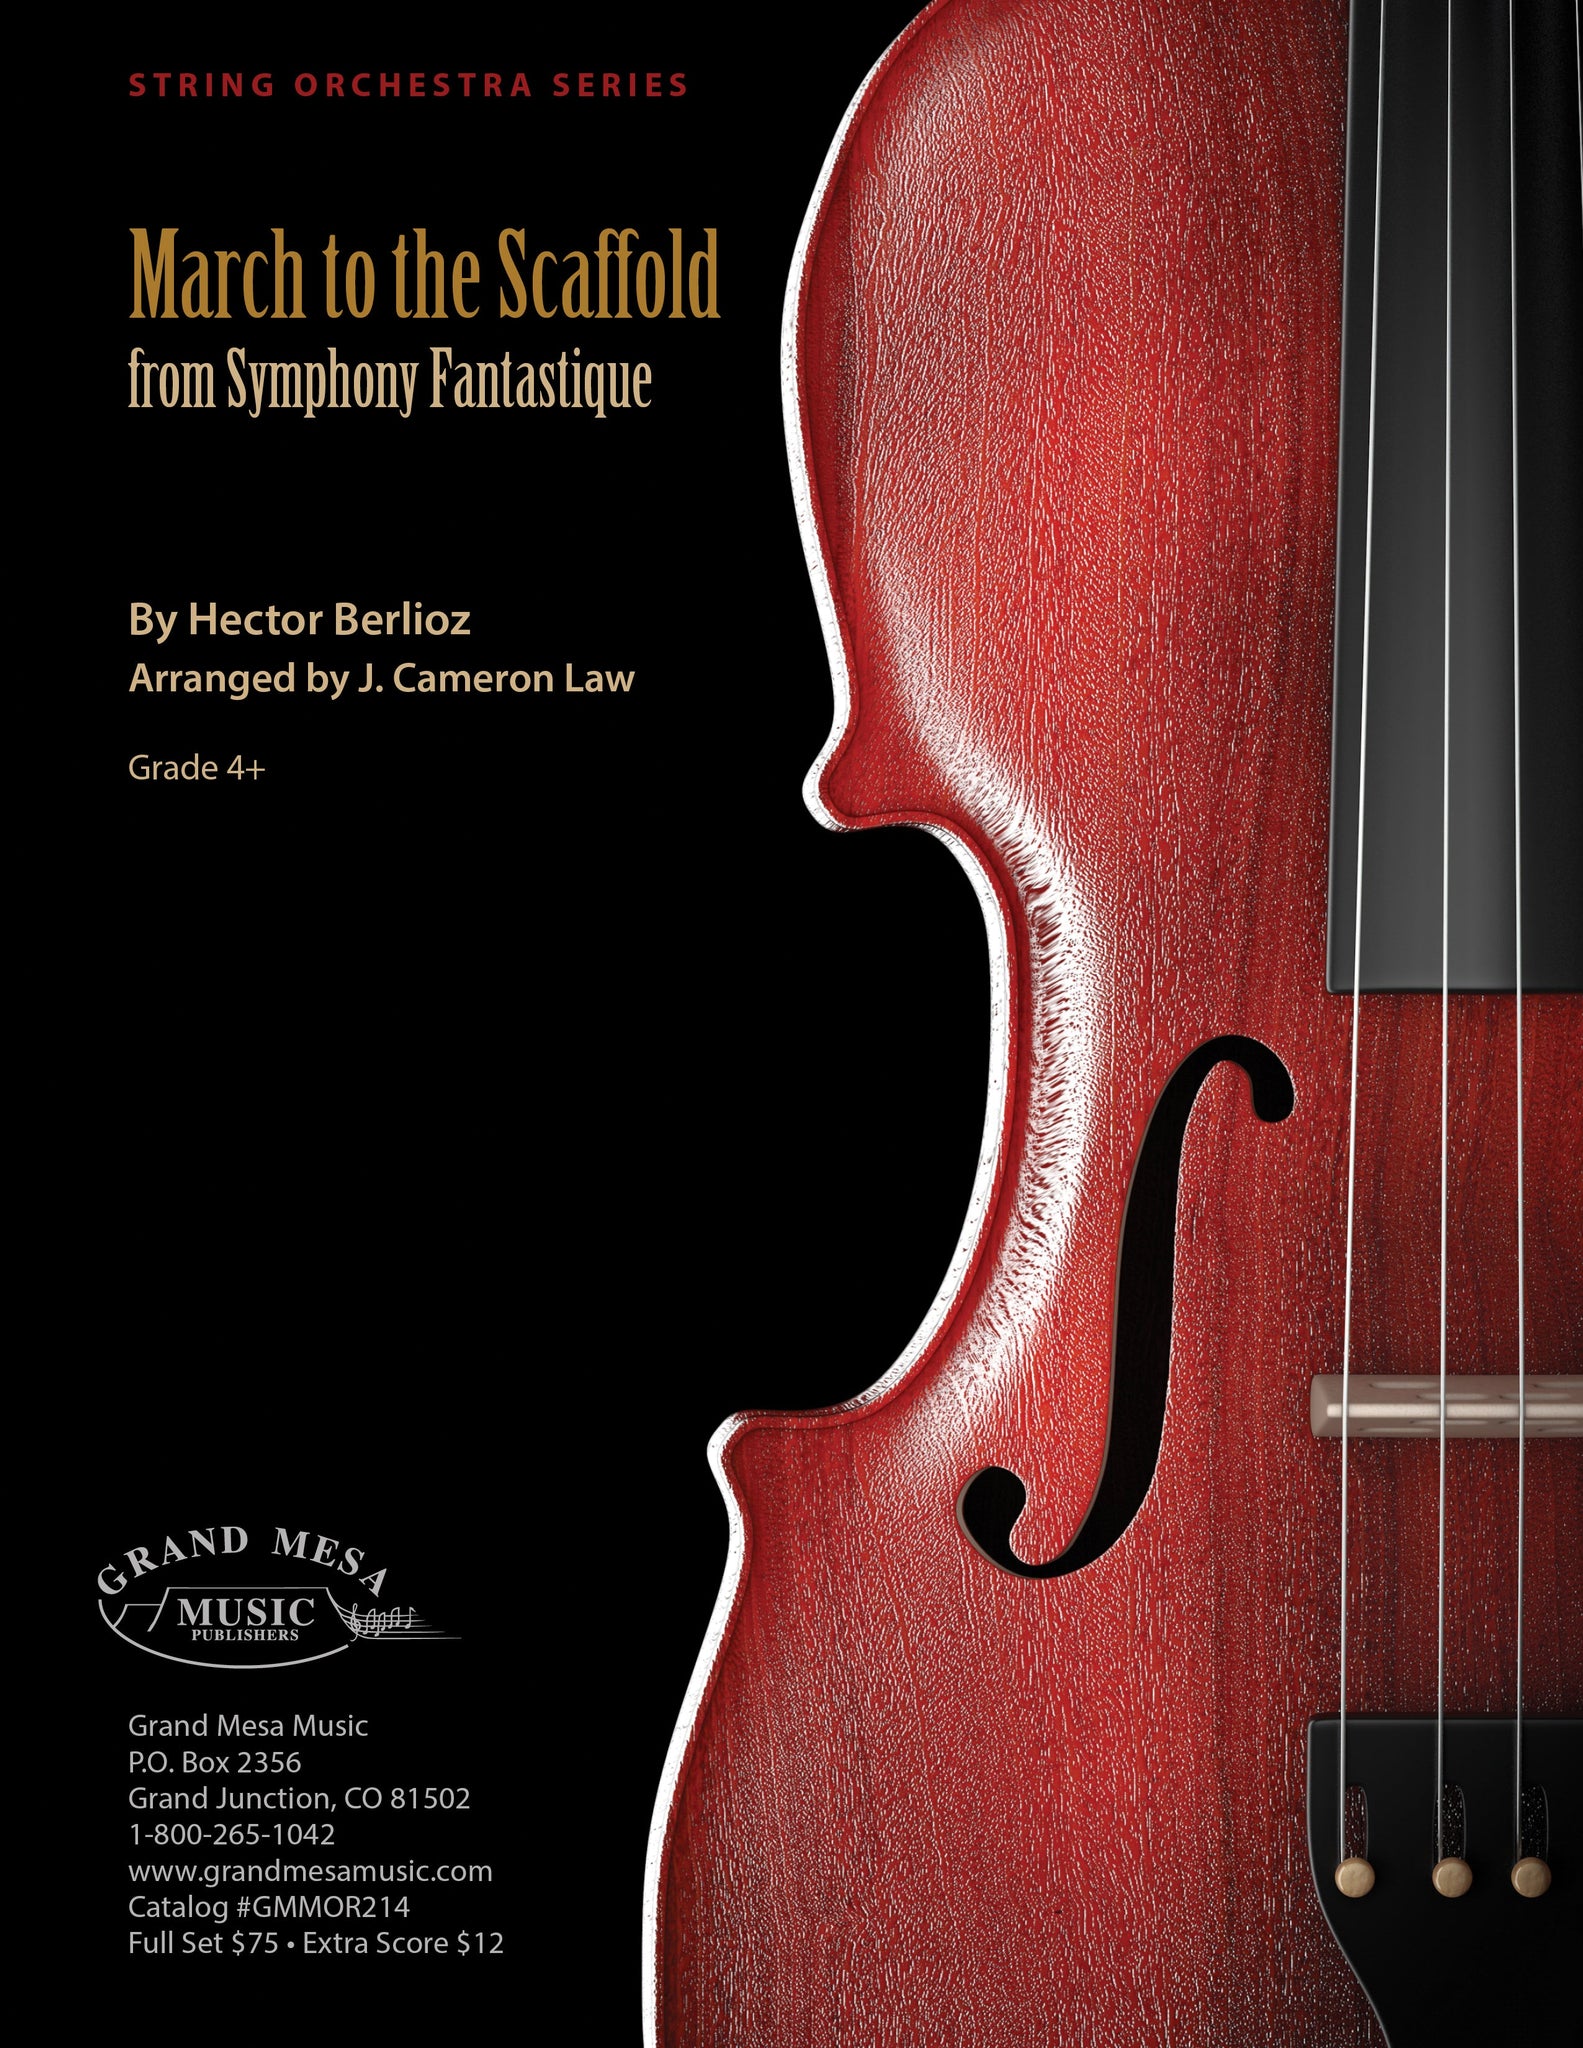 Strings sheet music cover of March to the Scaffold, composed by Hector Berlioz, arranged by J. Cameron Law.